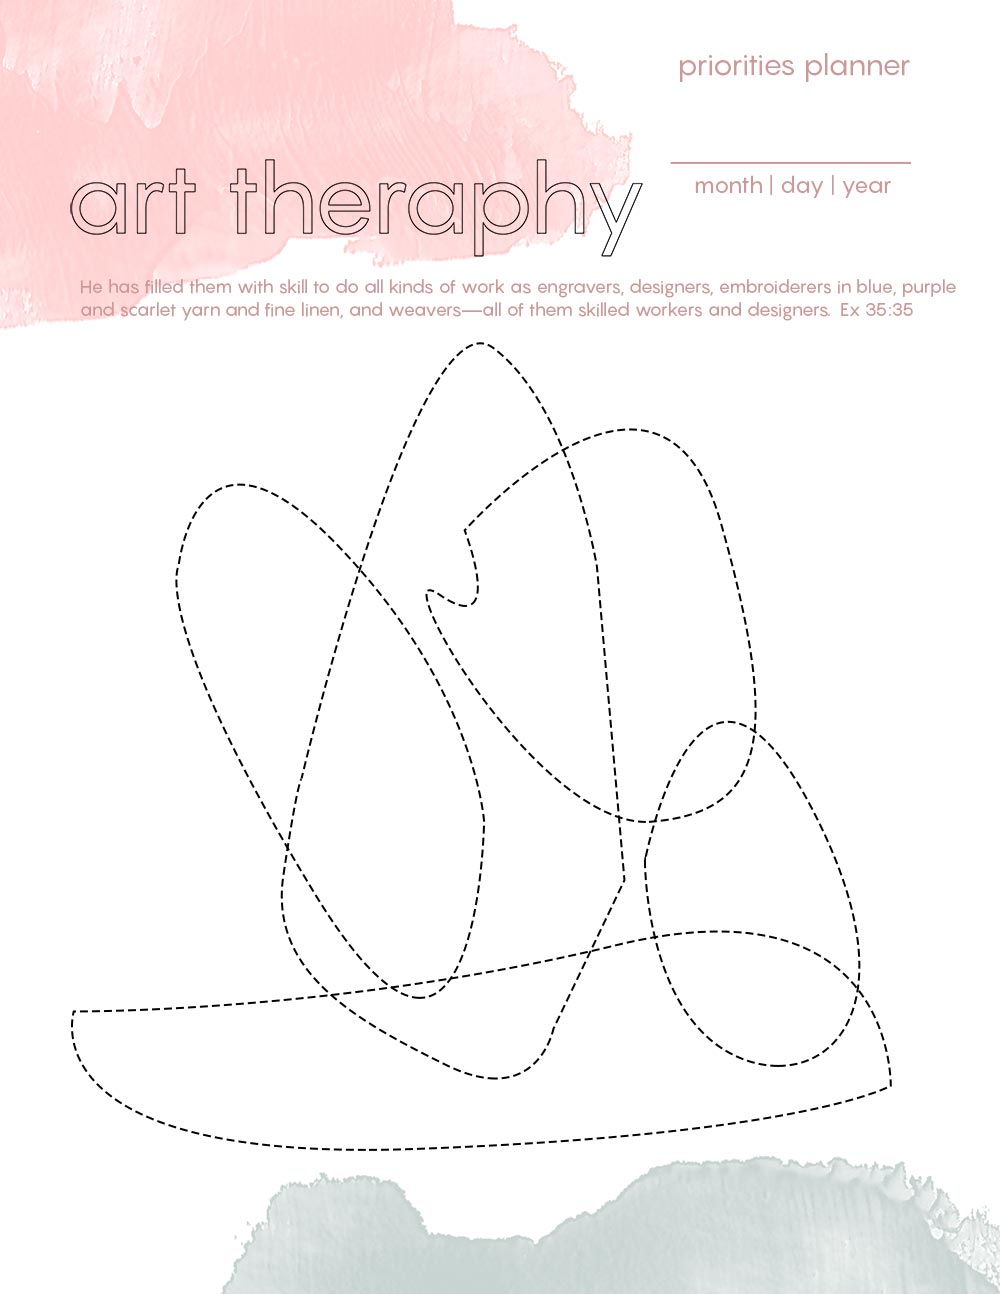 Art Therapy - Priorities Planner 2020 